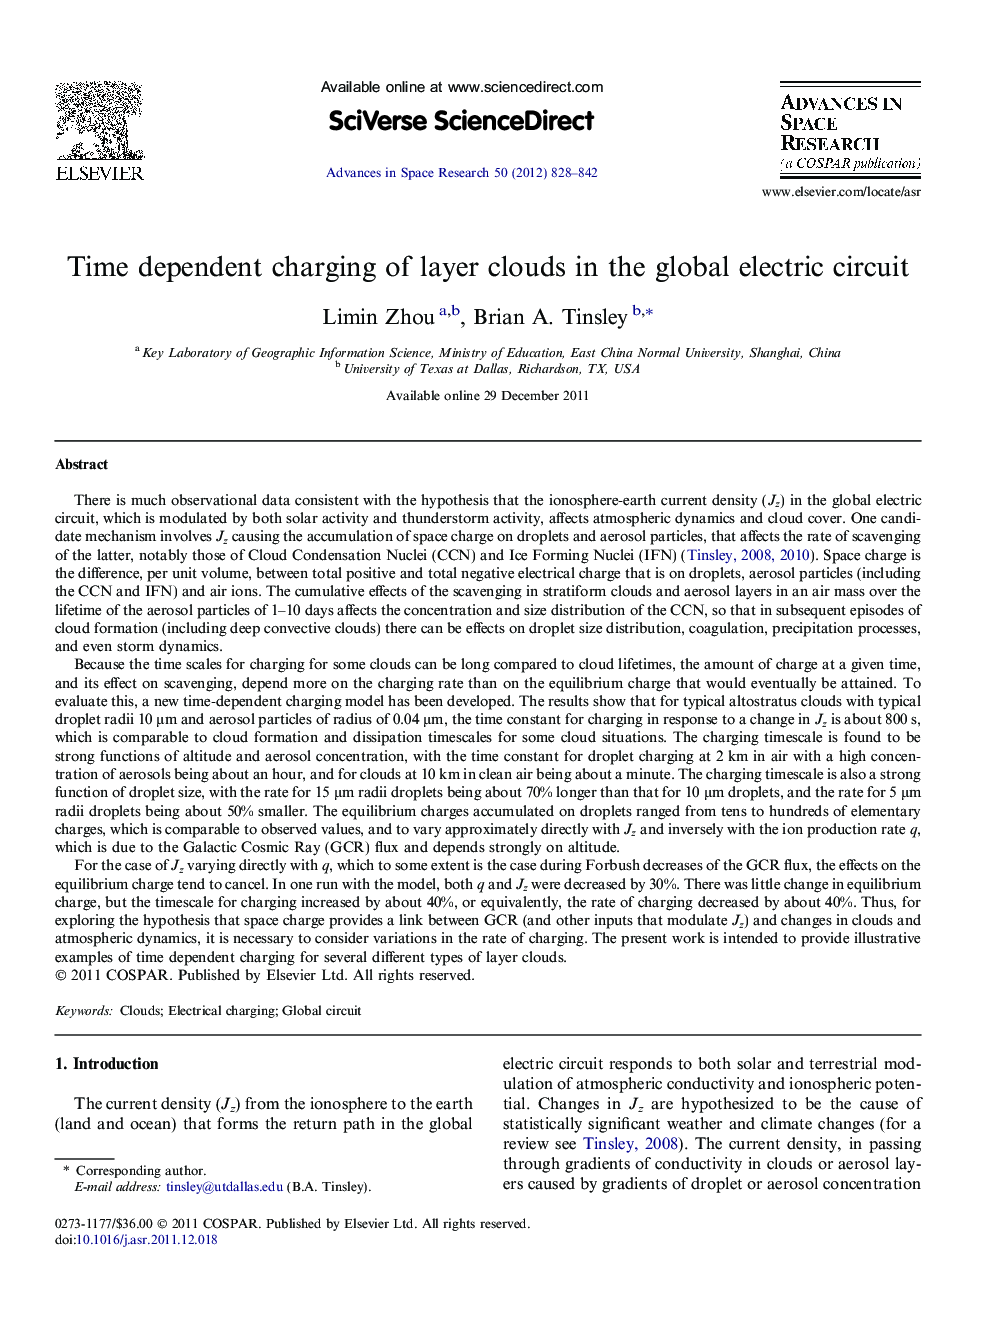 Time dependent charging of layer clouds in the global electric circuit